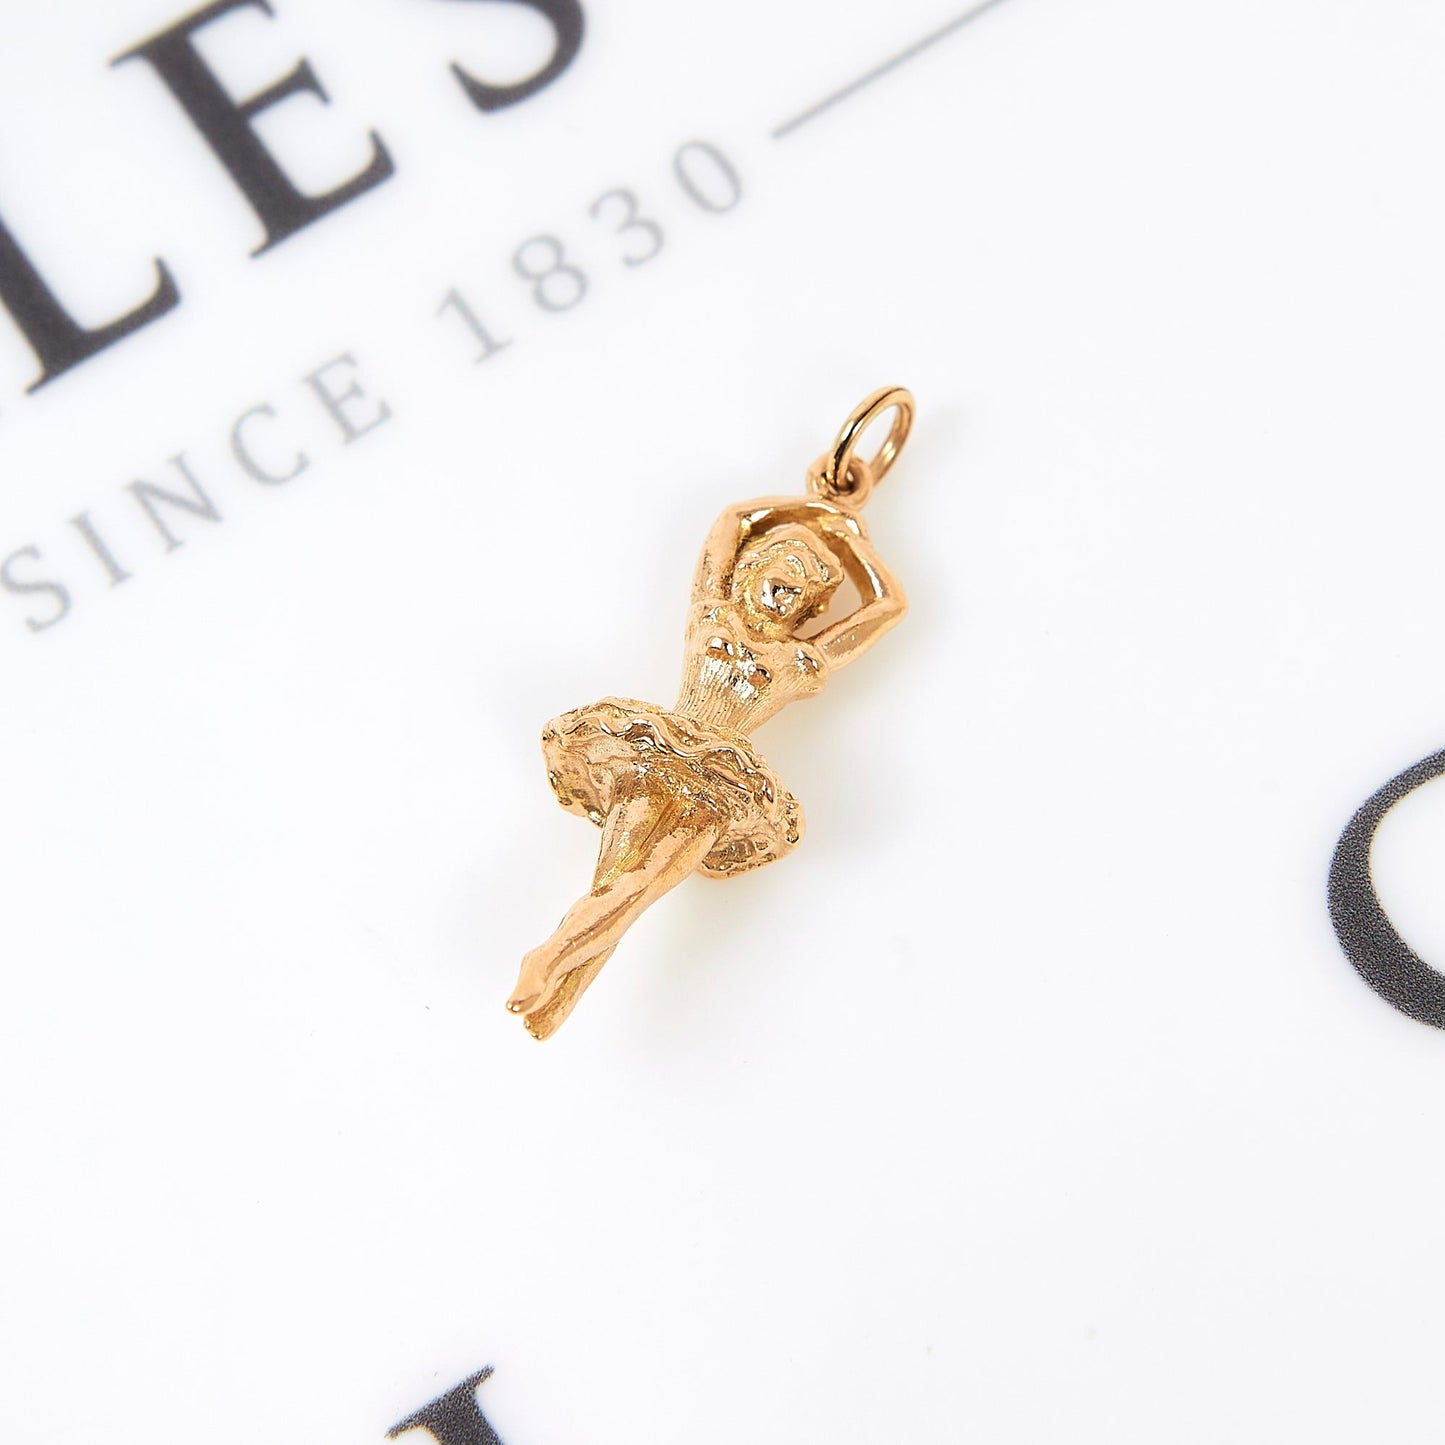 Pre-owned 9ct Gold Ballerina Charm Pendant